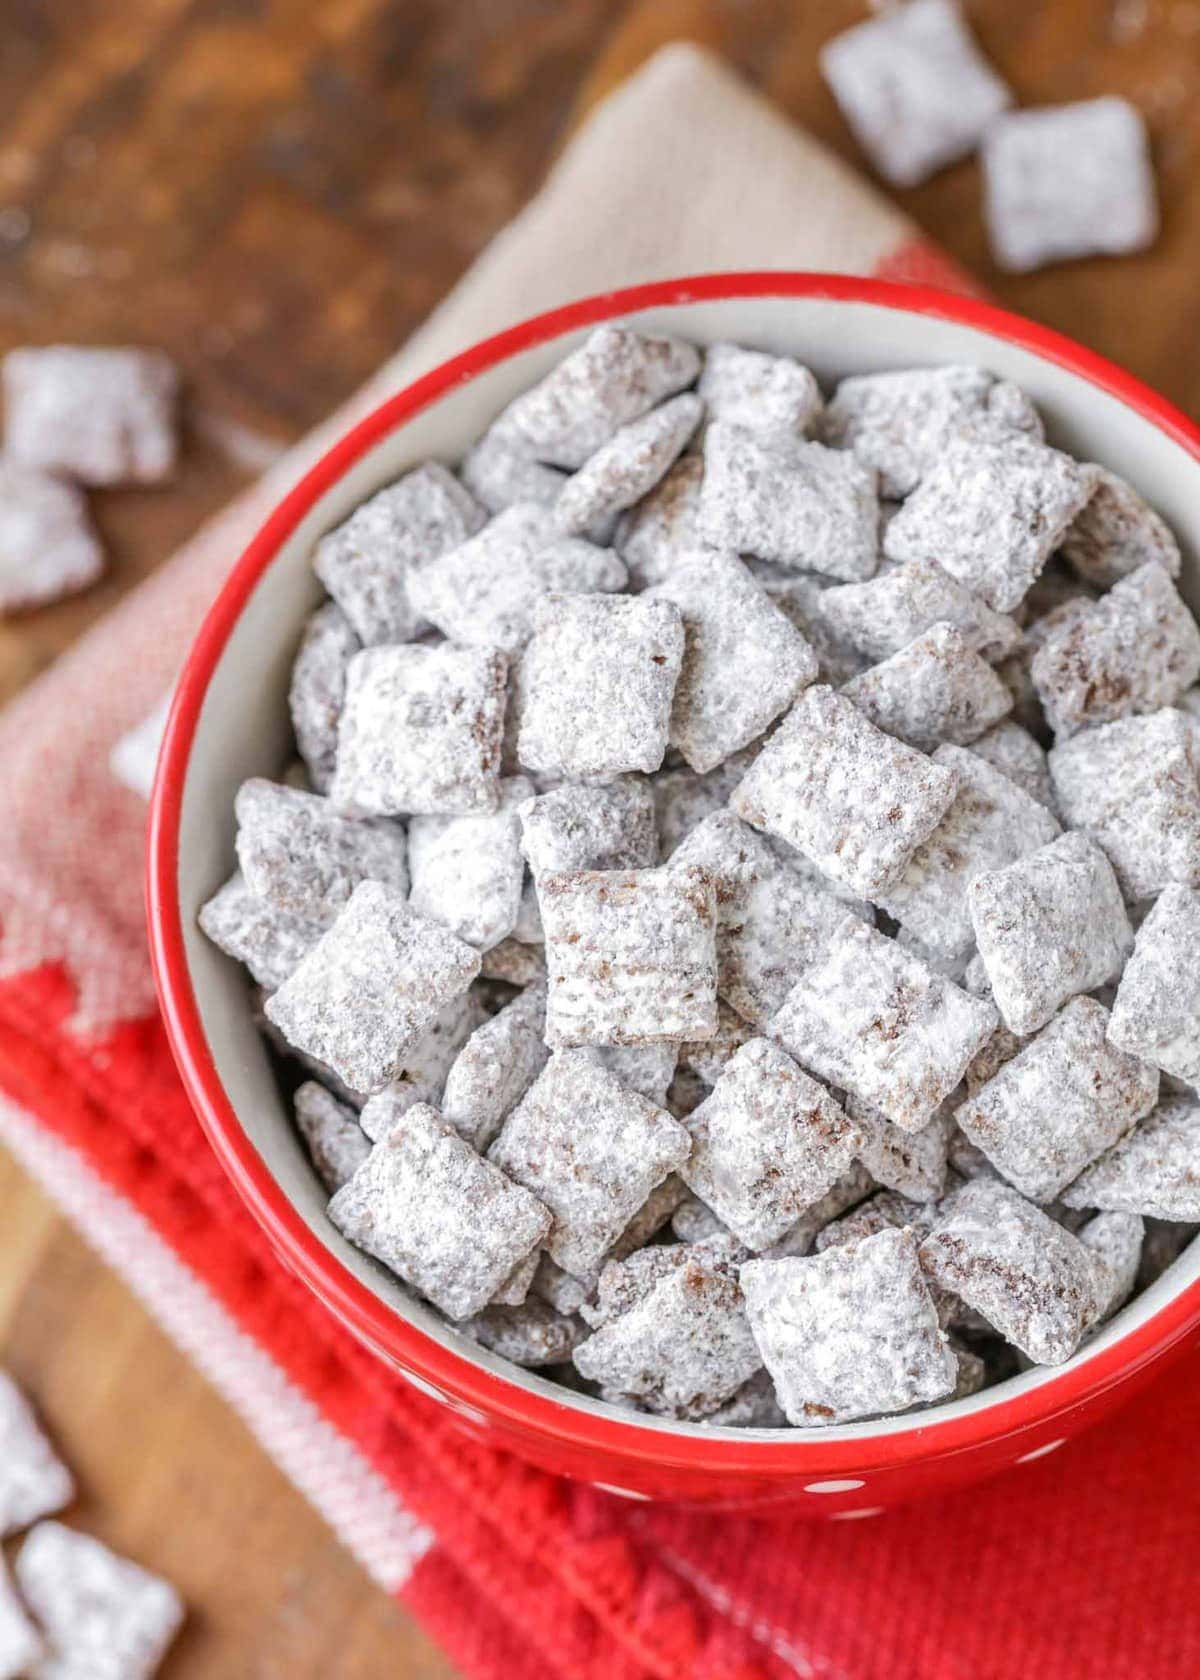 puppy chow recipe in a red bowl